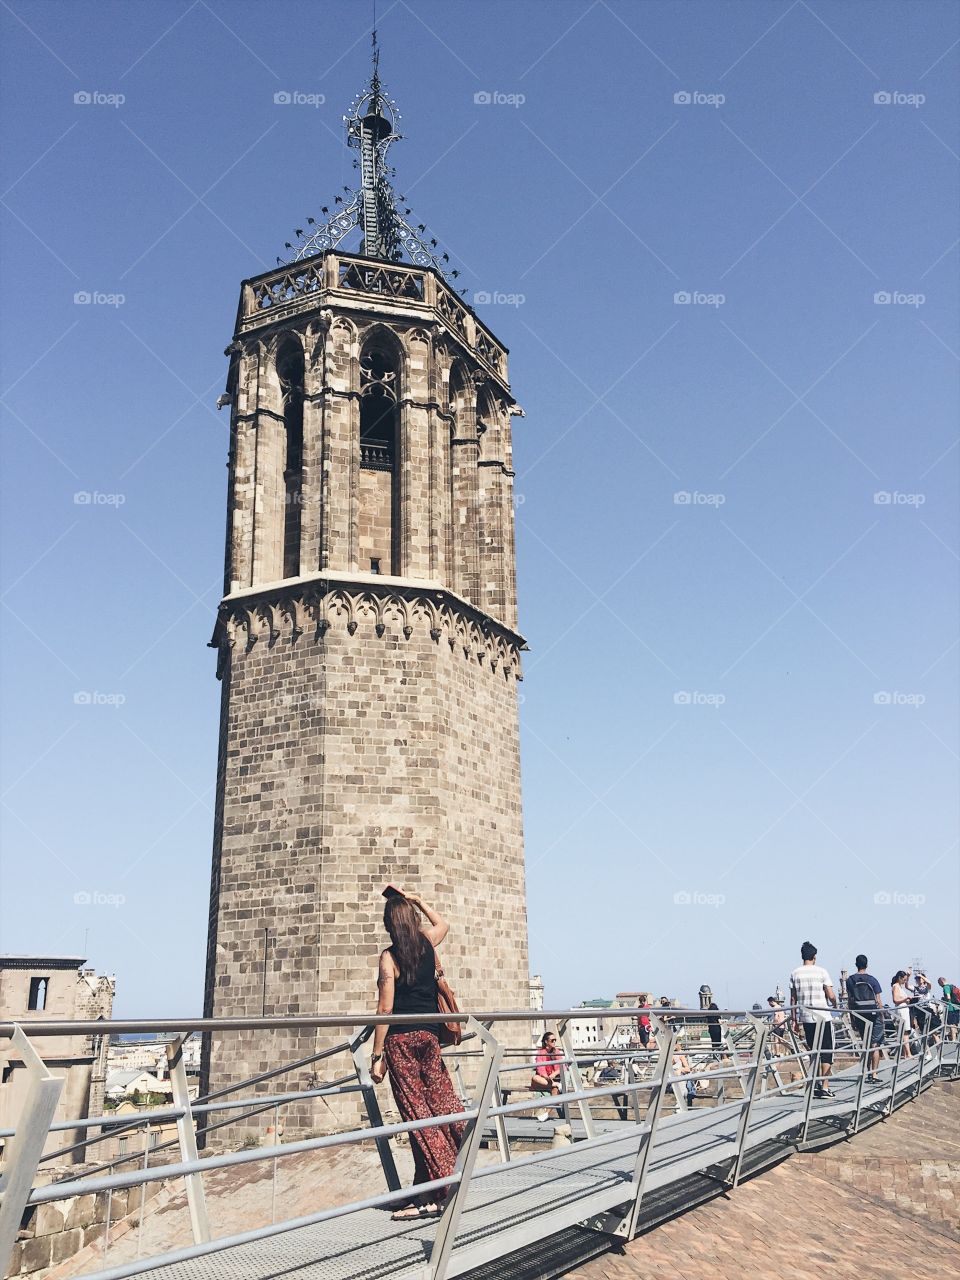 The view from the top of a historic cathedral in Barcelona, being enjoyed by several tourists on a sunny day with clear skies.